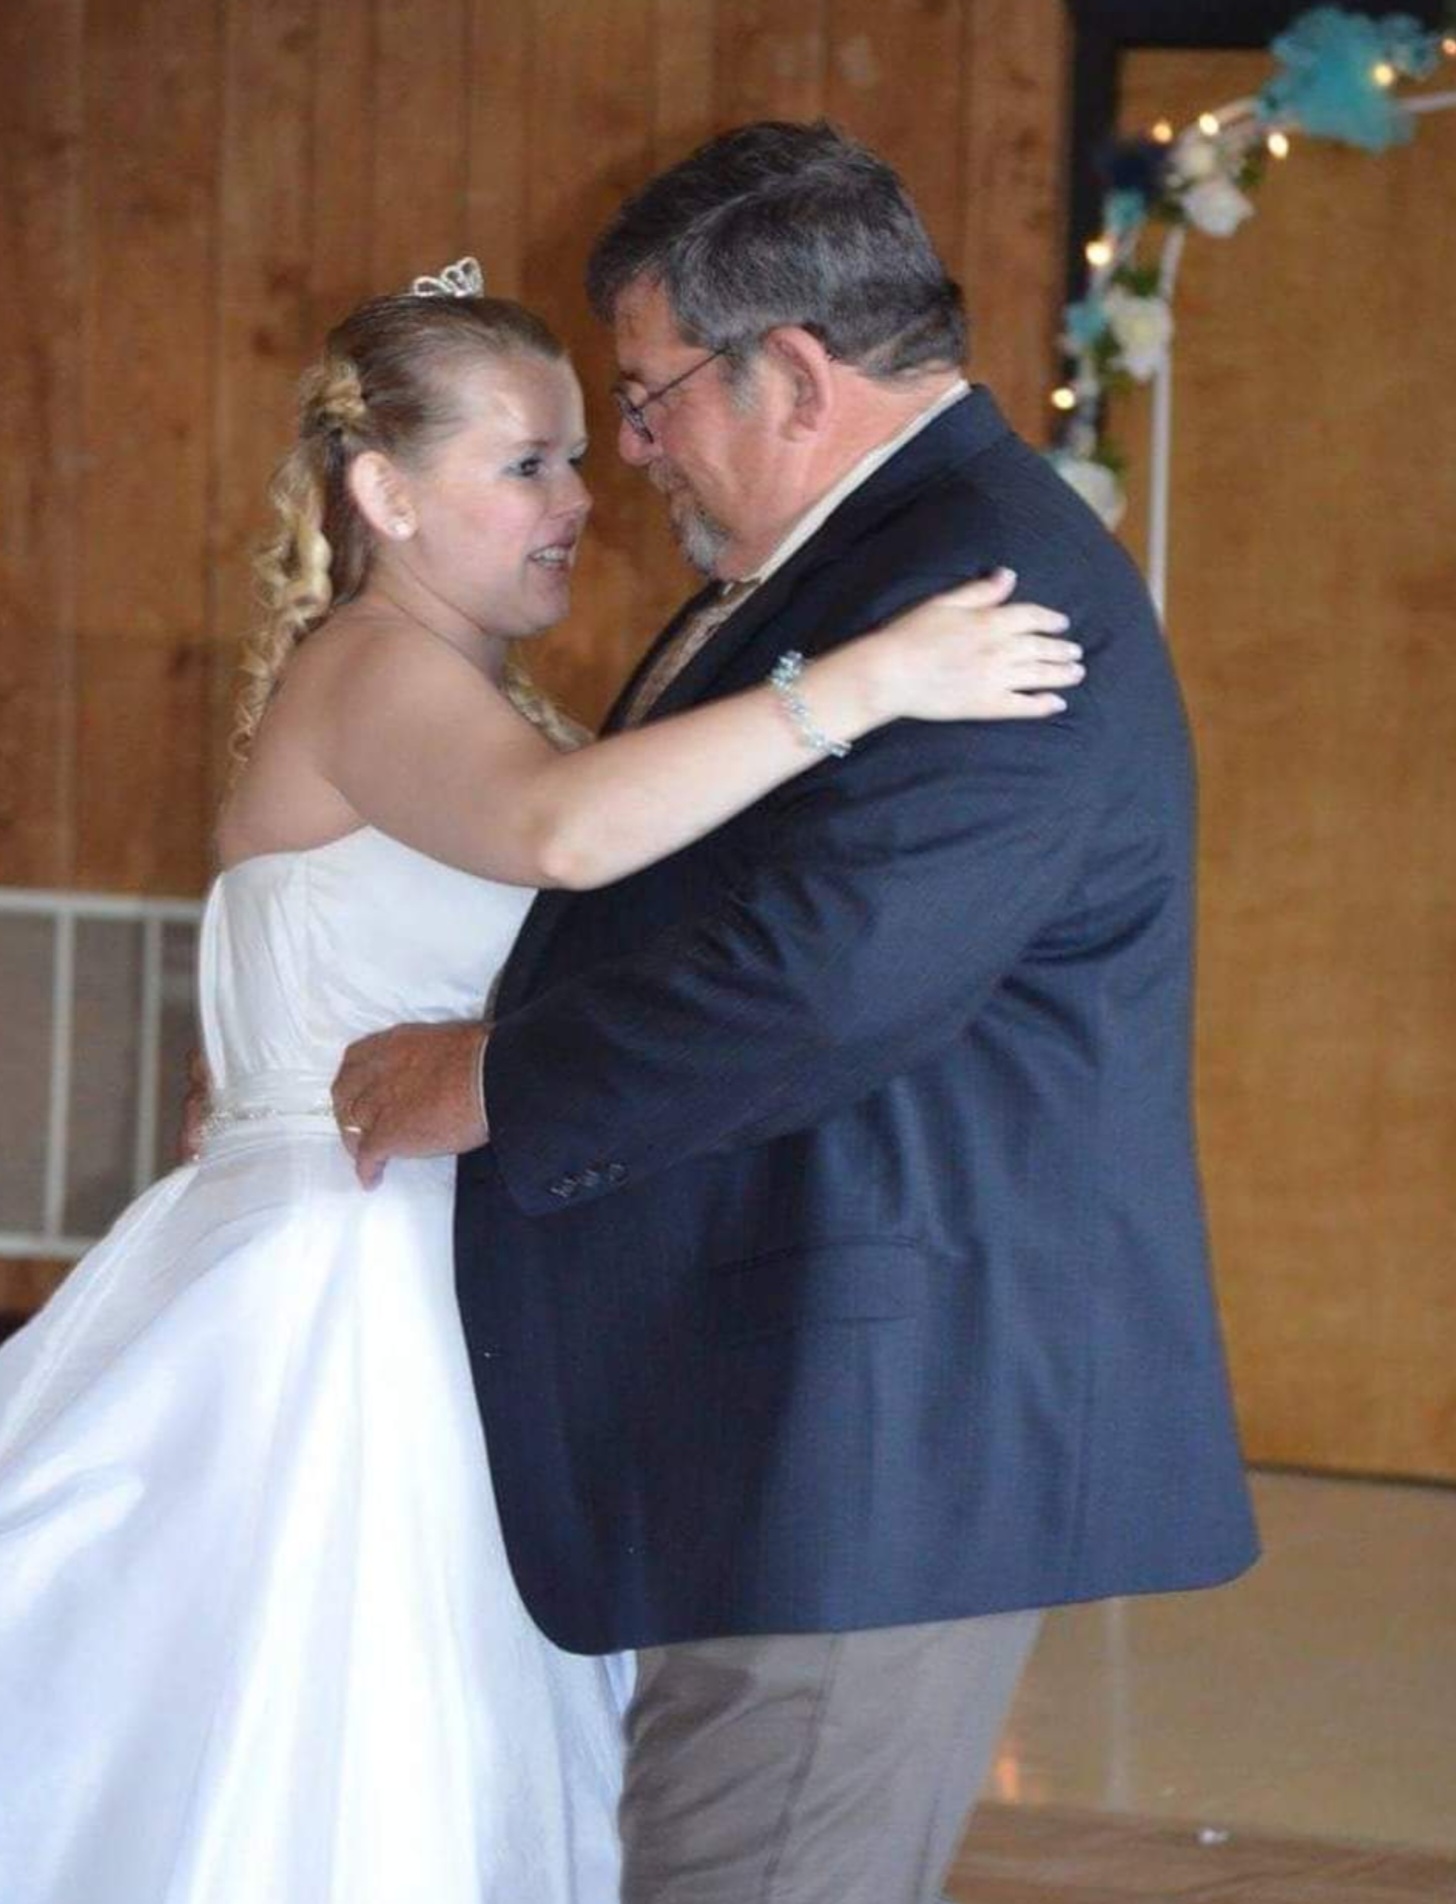 My daddy dancing with his oldest grandaughter at her wedding ♡♡♡